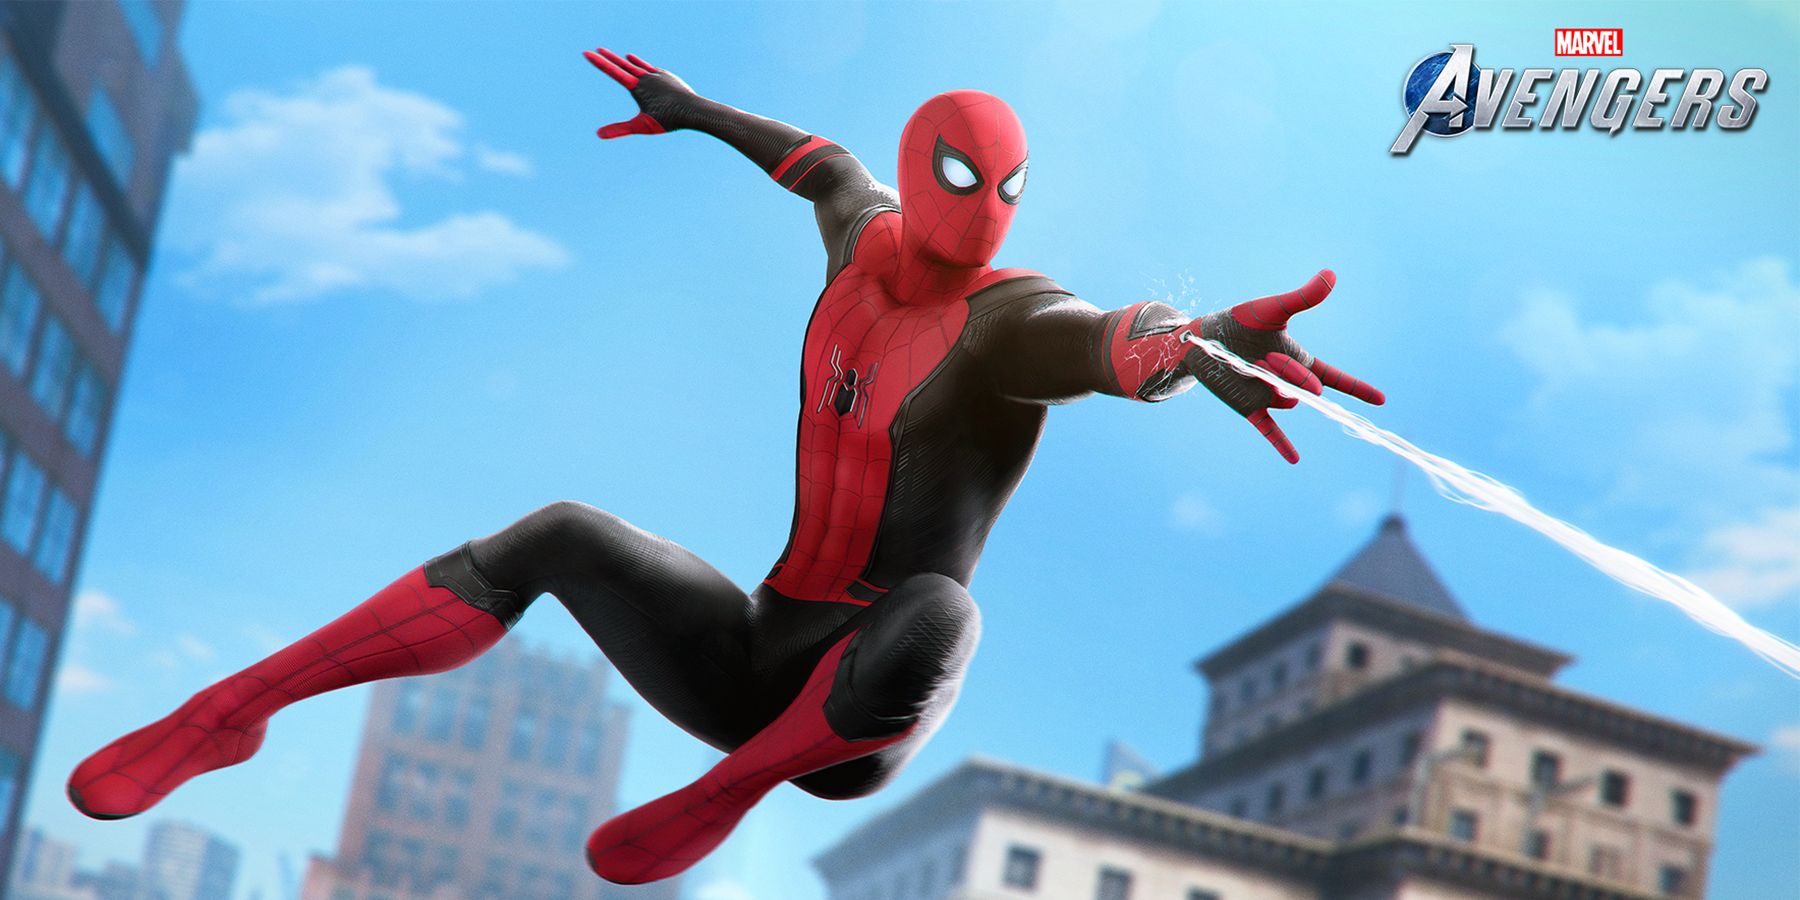 Marvel's Avengers Adds Spider-Man: Far From Home Costume to the Game